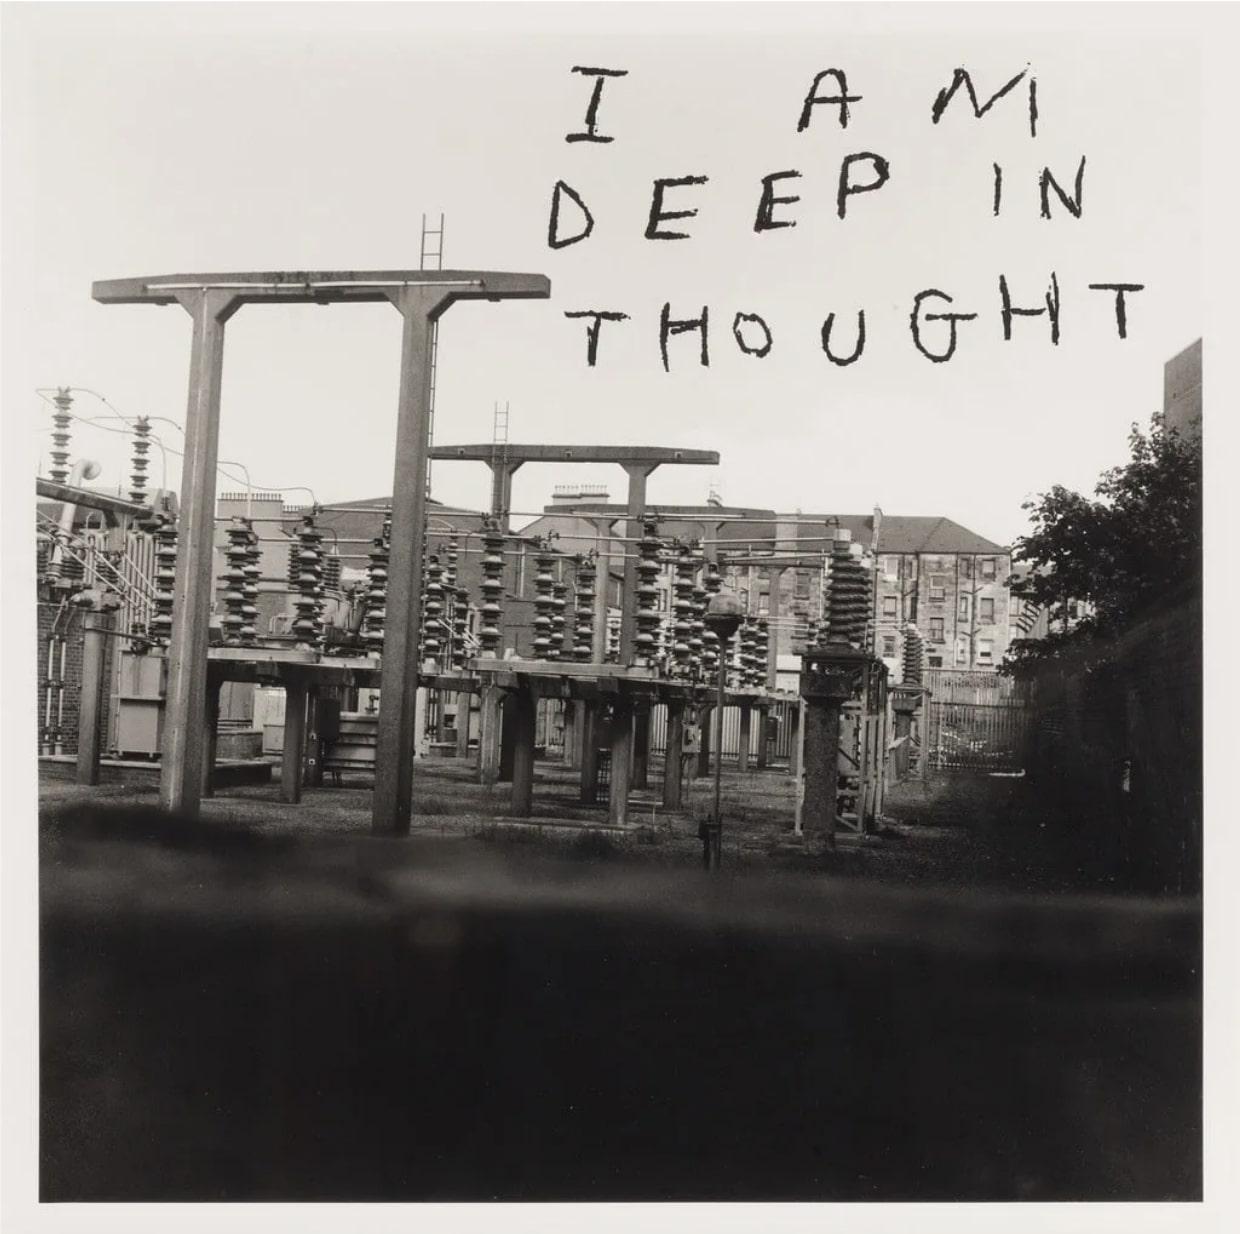 I am Deep In Thought  - Print by David Shrigley